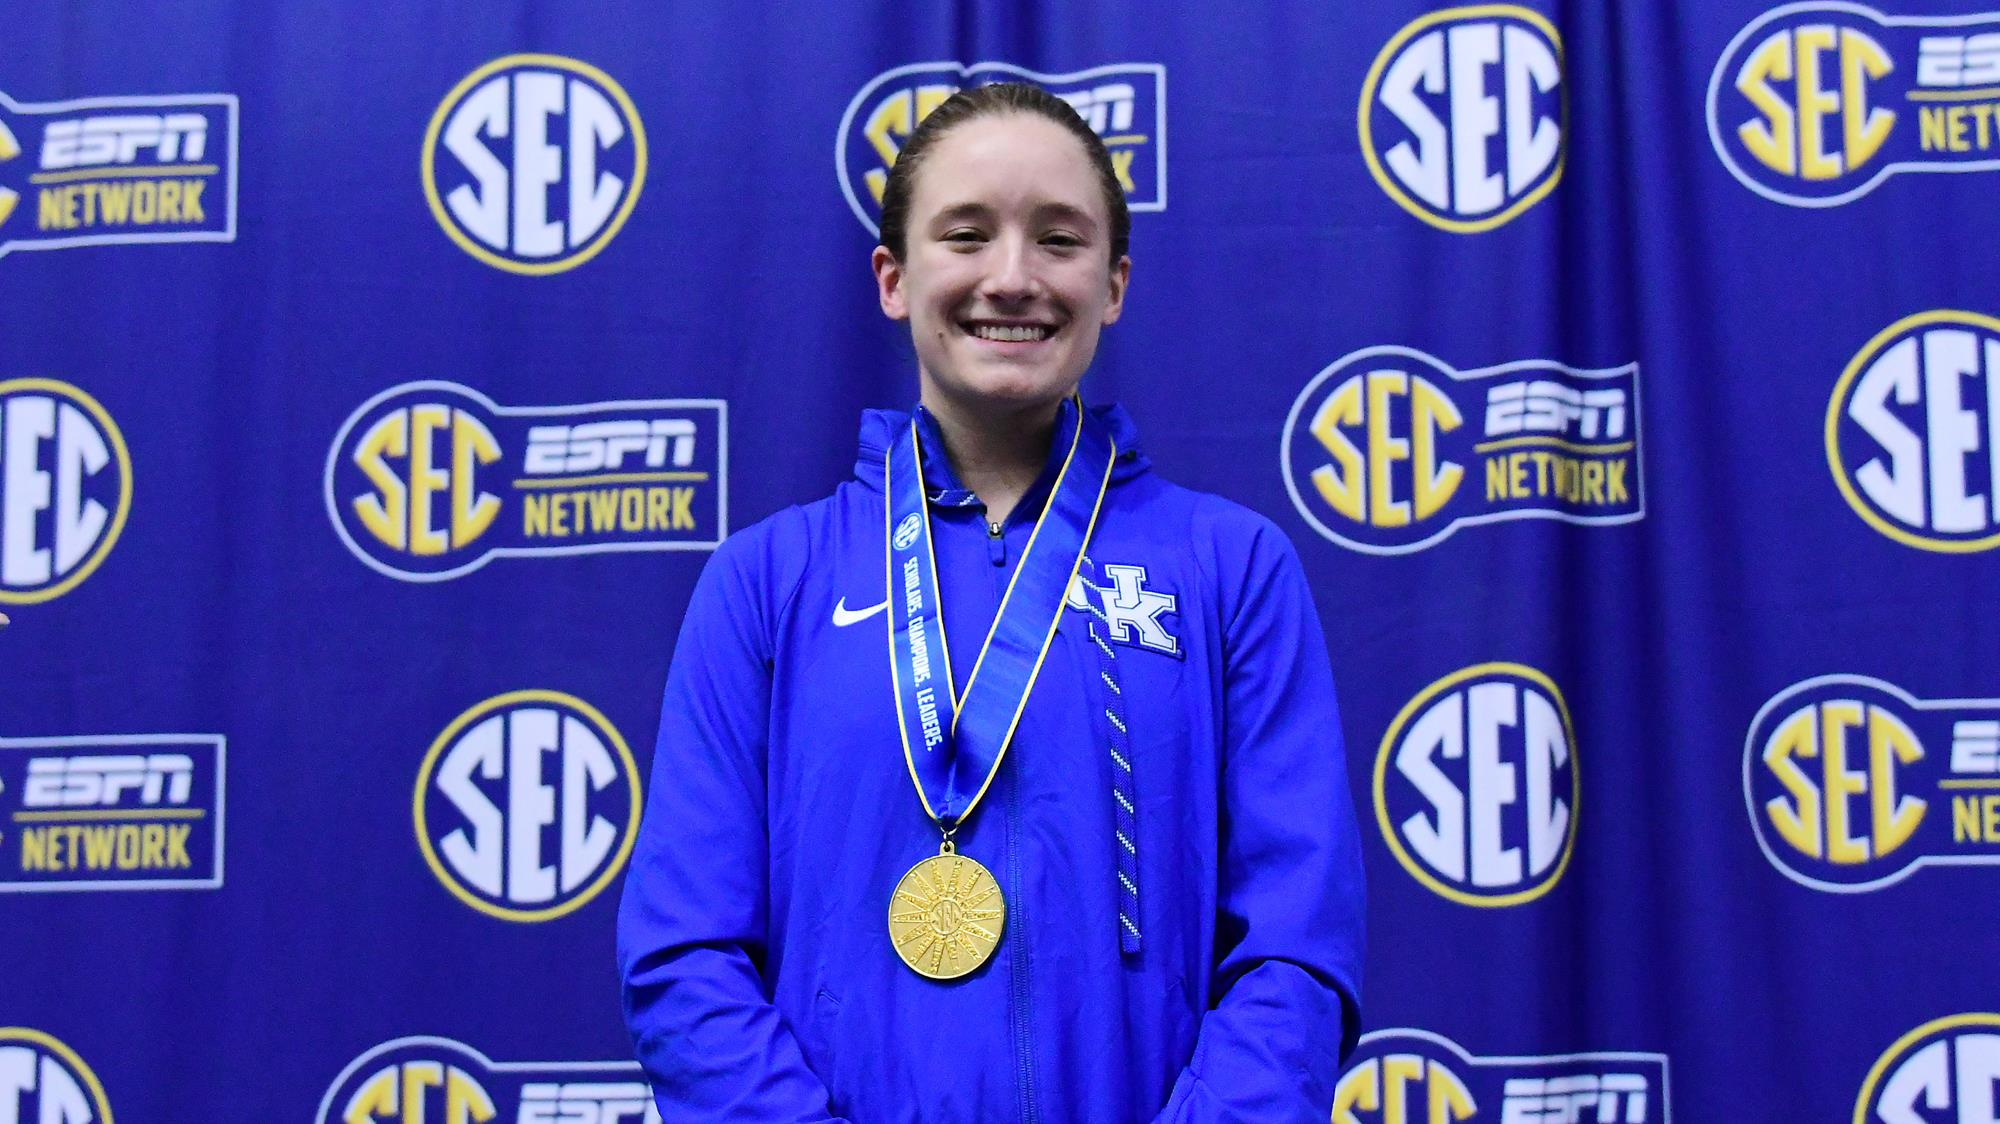 Best of '19-'20: Knight Wins SEC Diving Title